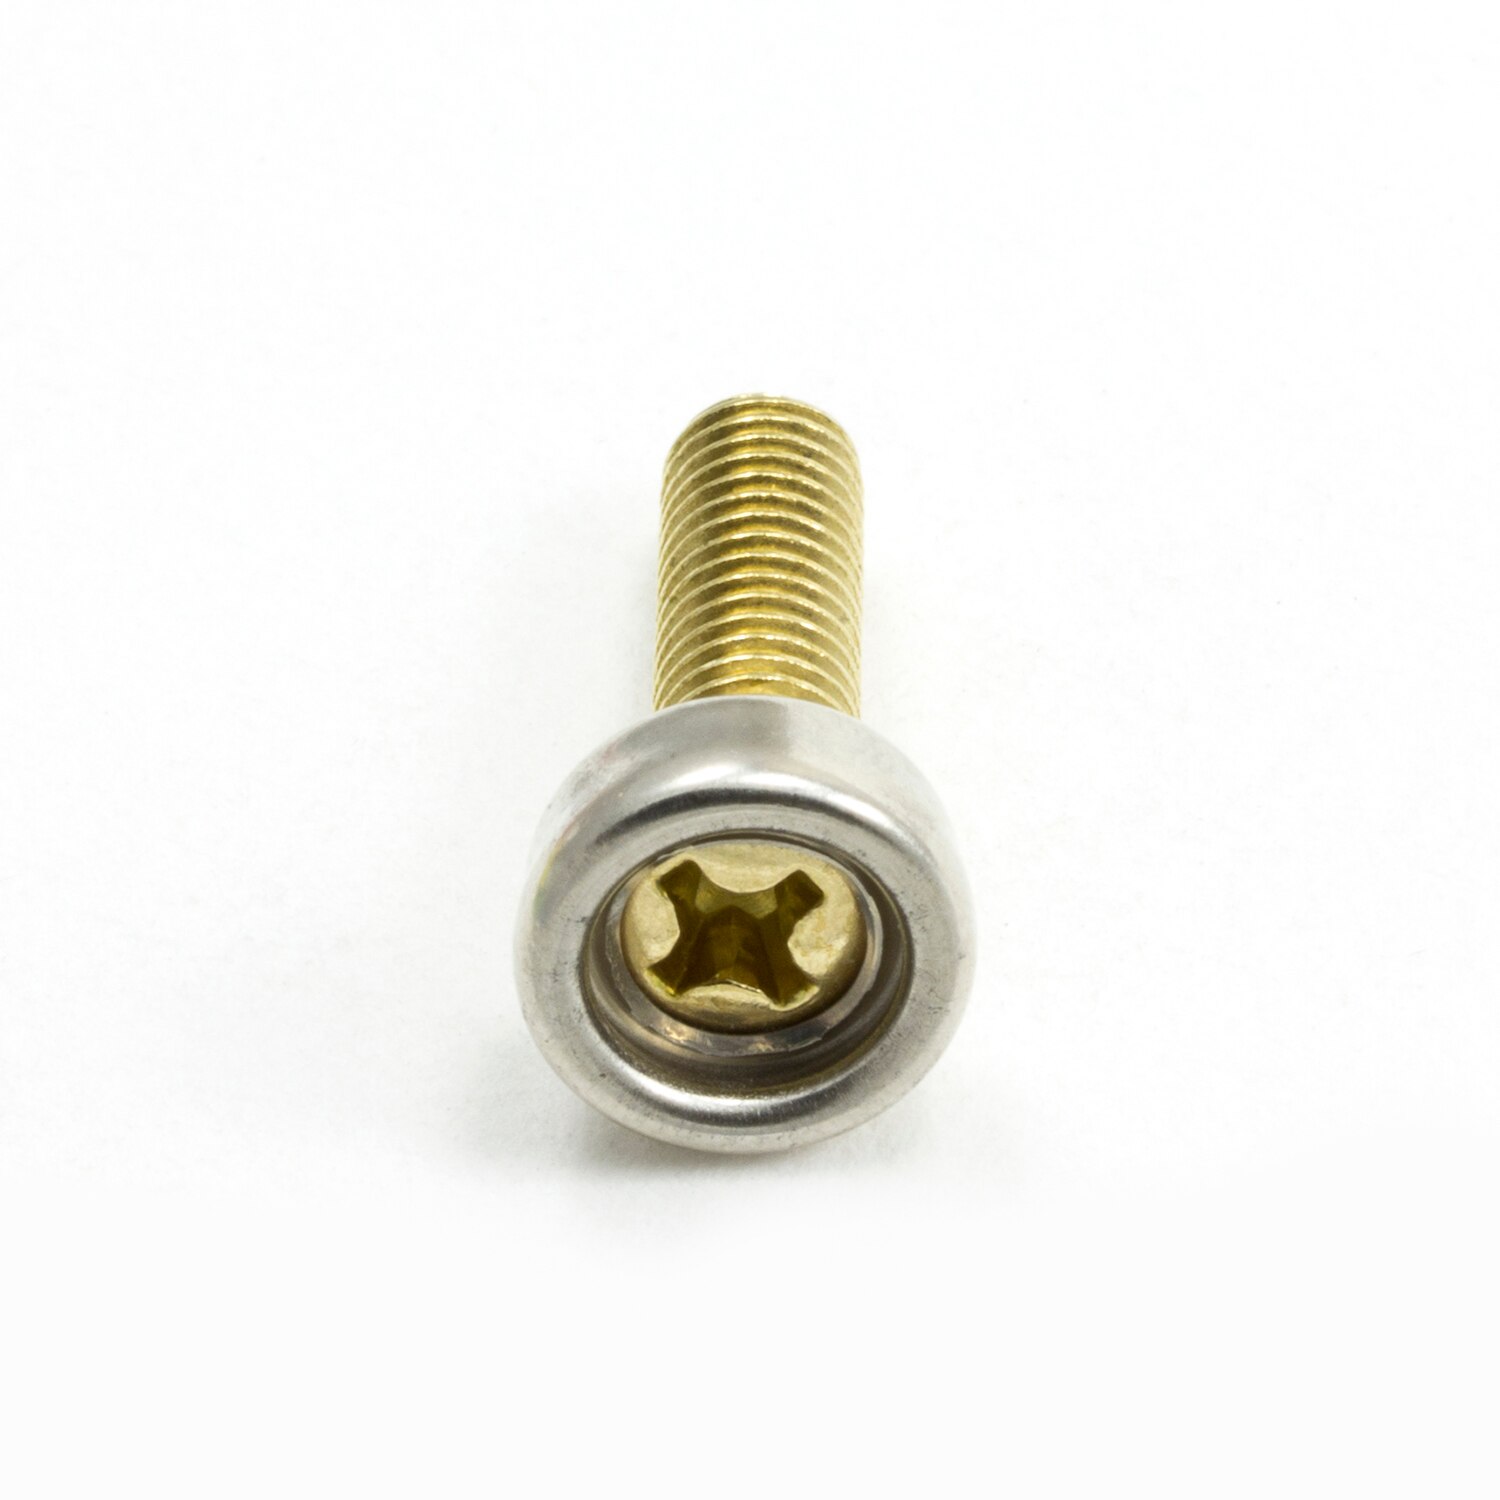 DOT Durable Screw Stud 93-XB-107087-1A 5/8 Nickel Plated Brass